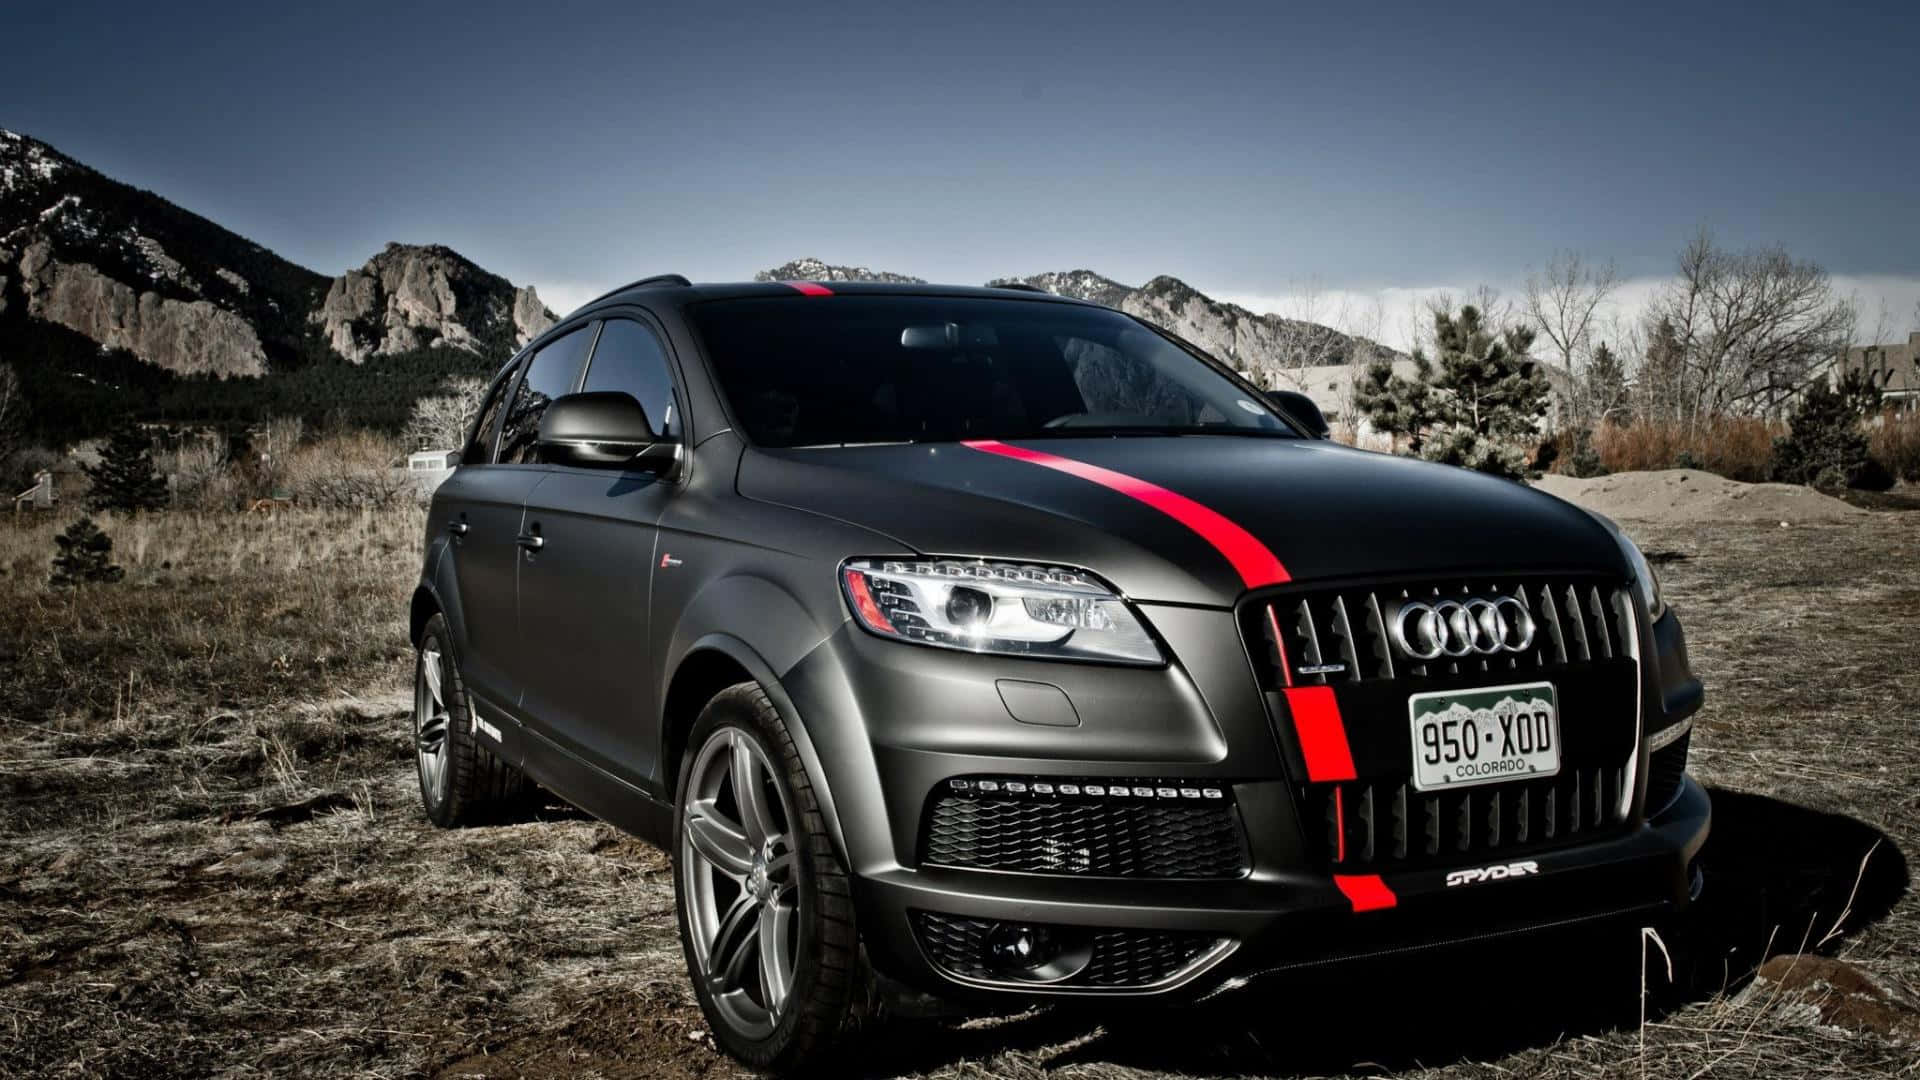 Sleek and Modern Audi Q7 in Action Wallpaper